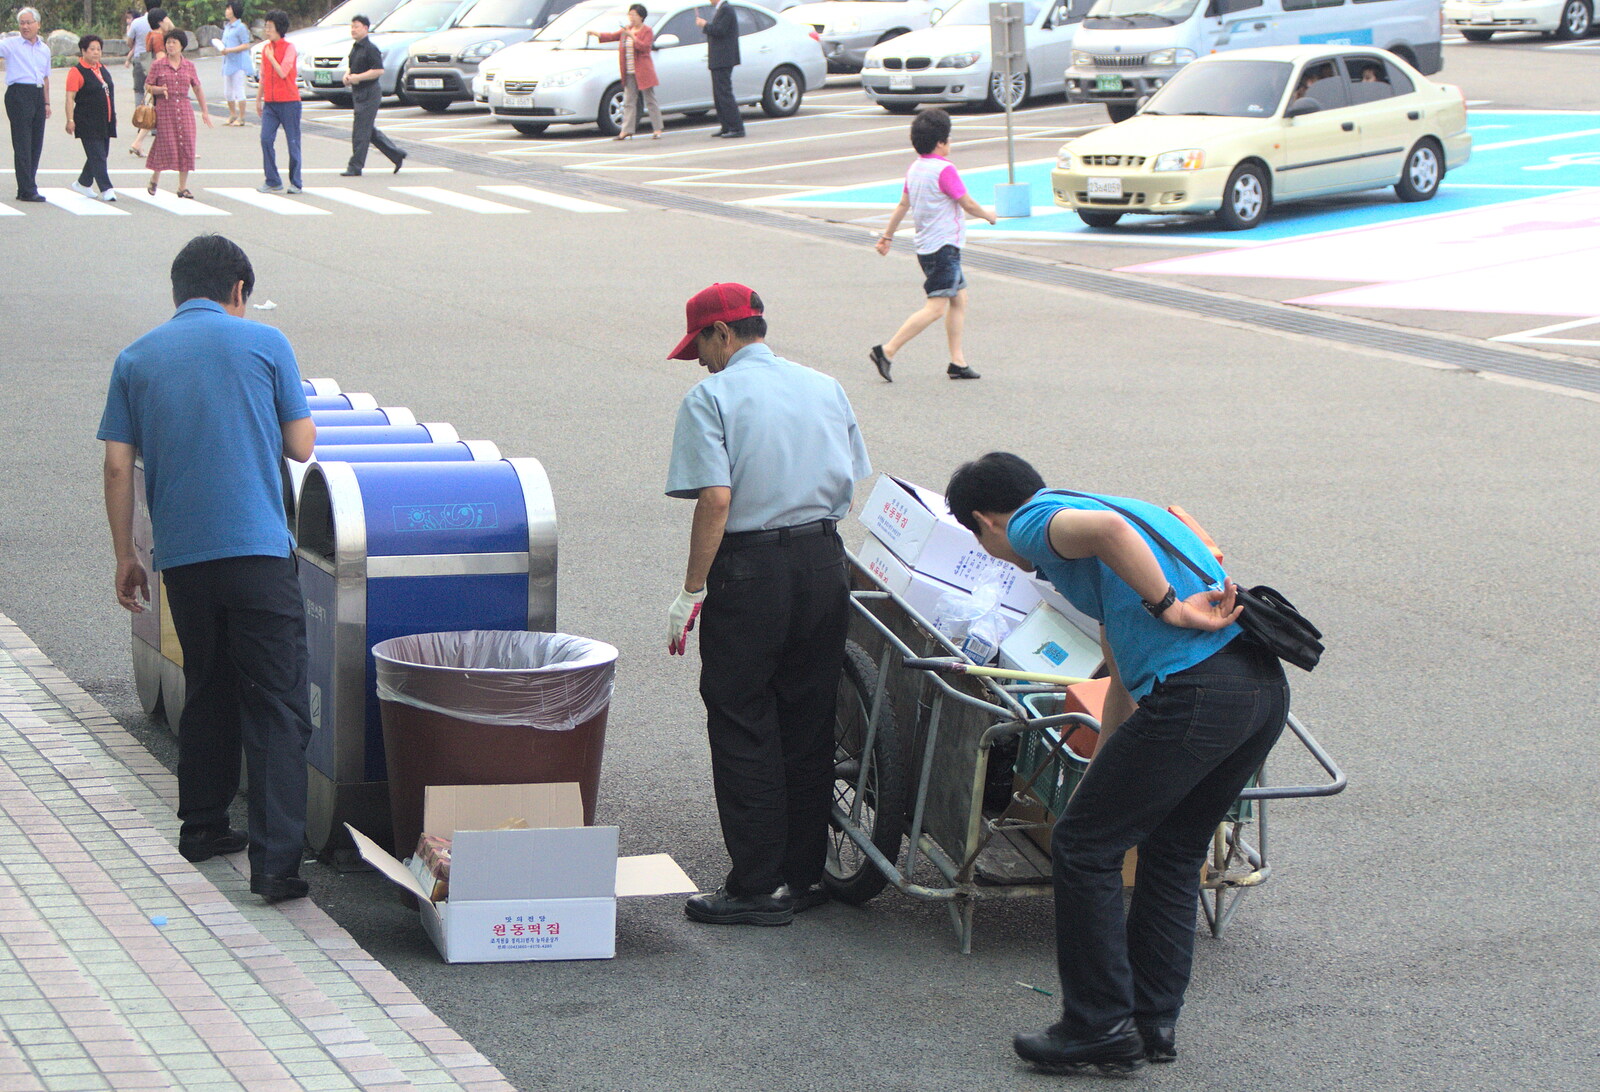 The bin cleaners appear from Working at Samsung, and Geumosan Mountain, Gumi, Gyeongsangbuk-do, Korea - 24th June 2012